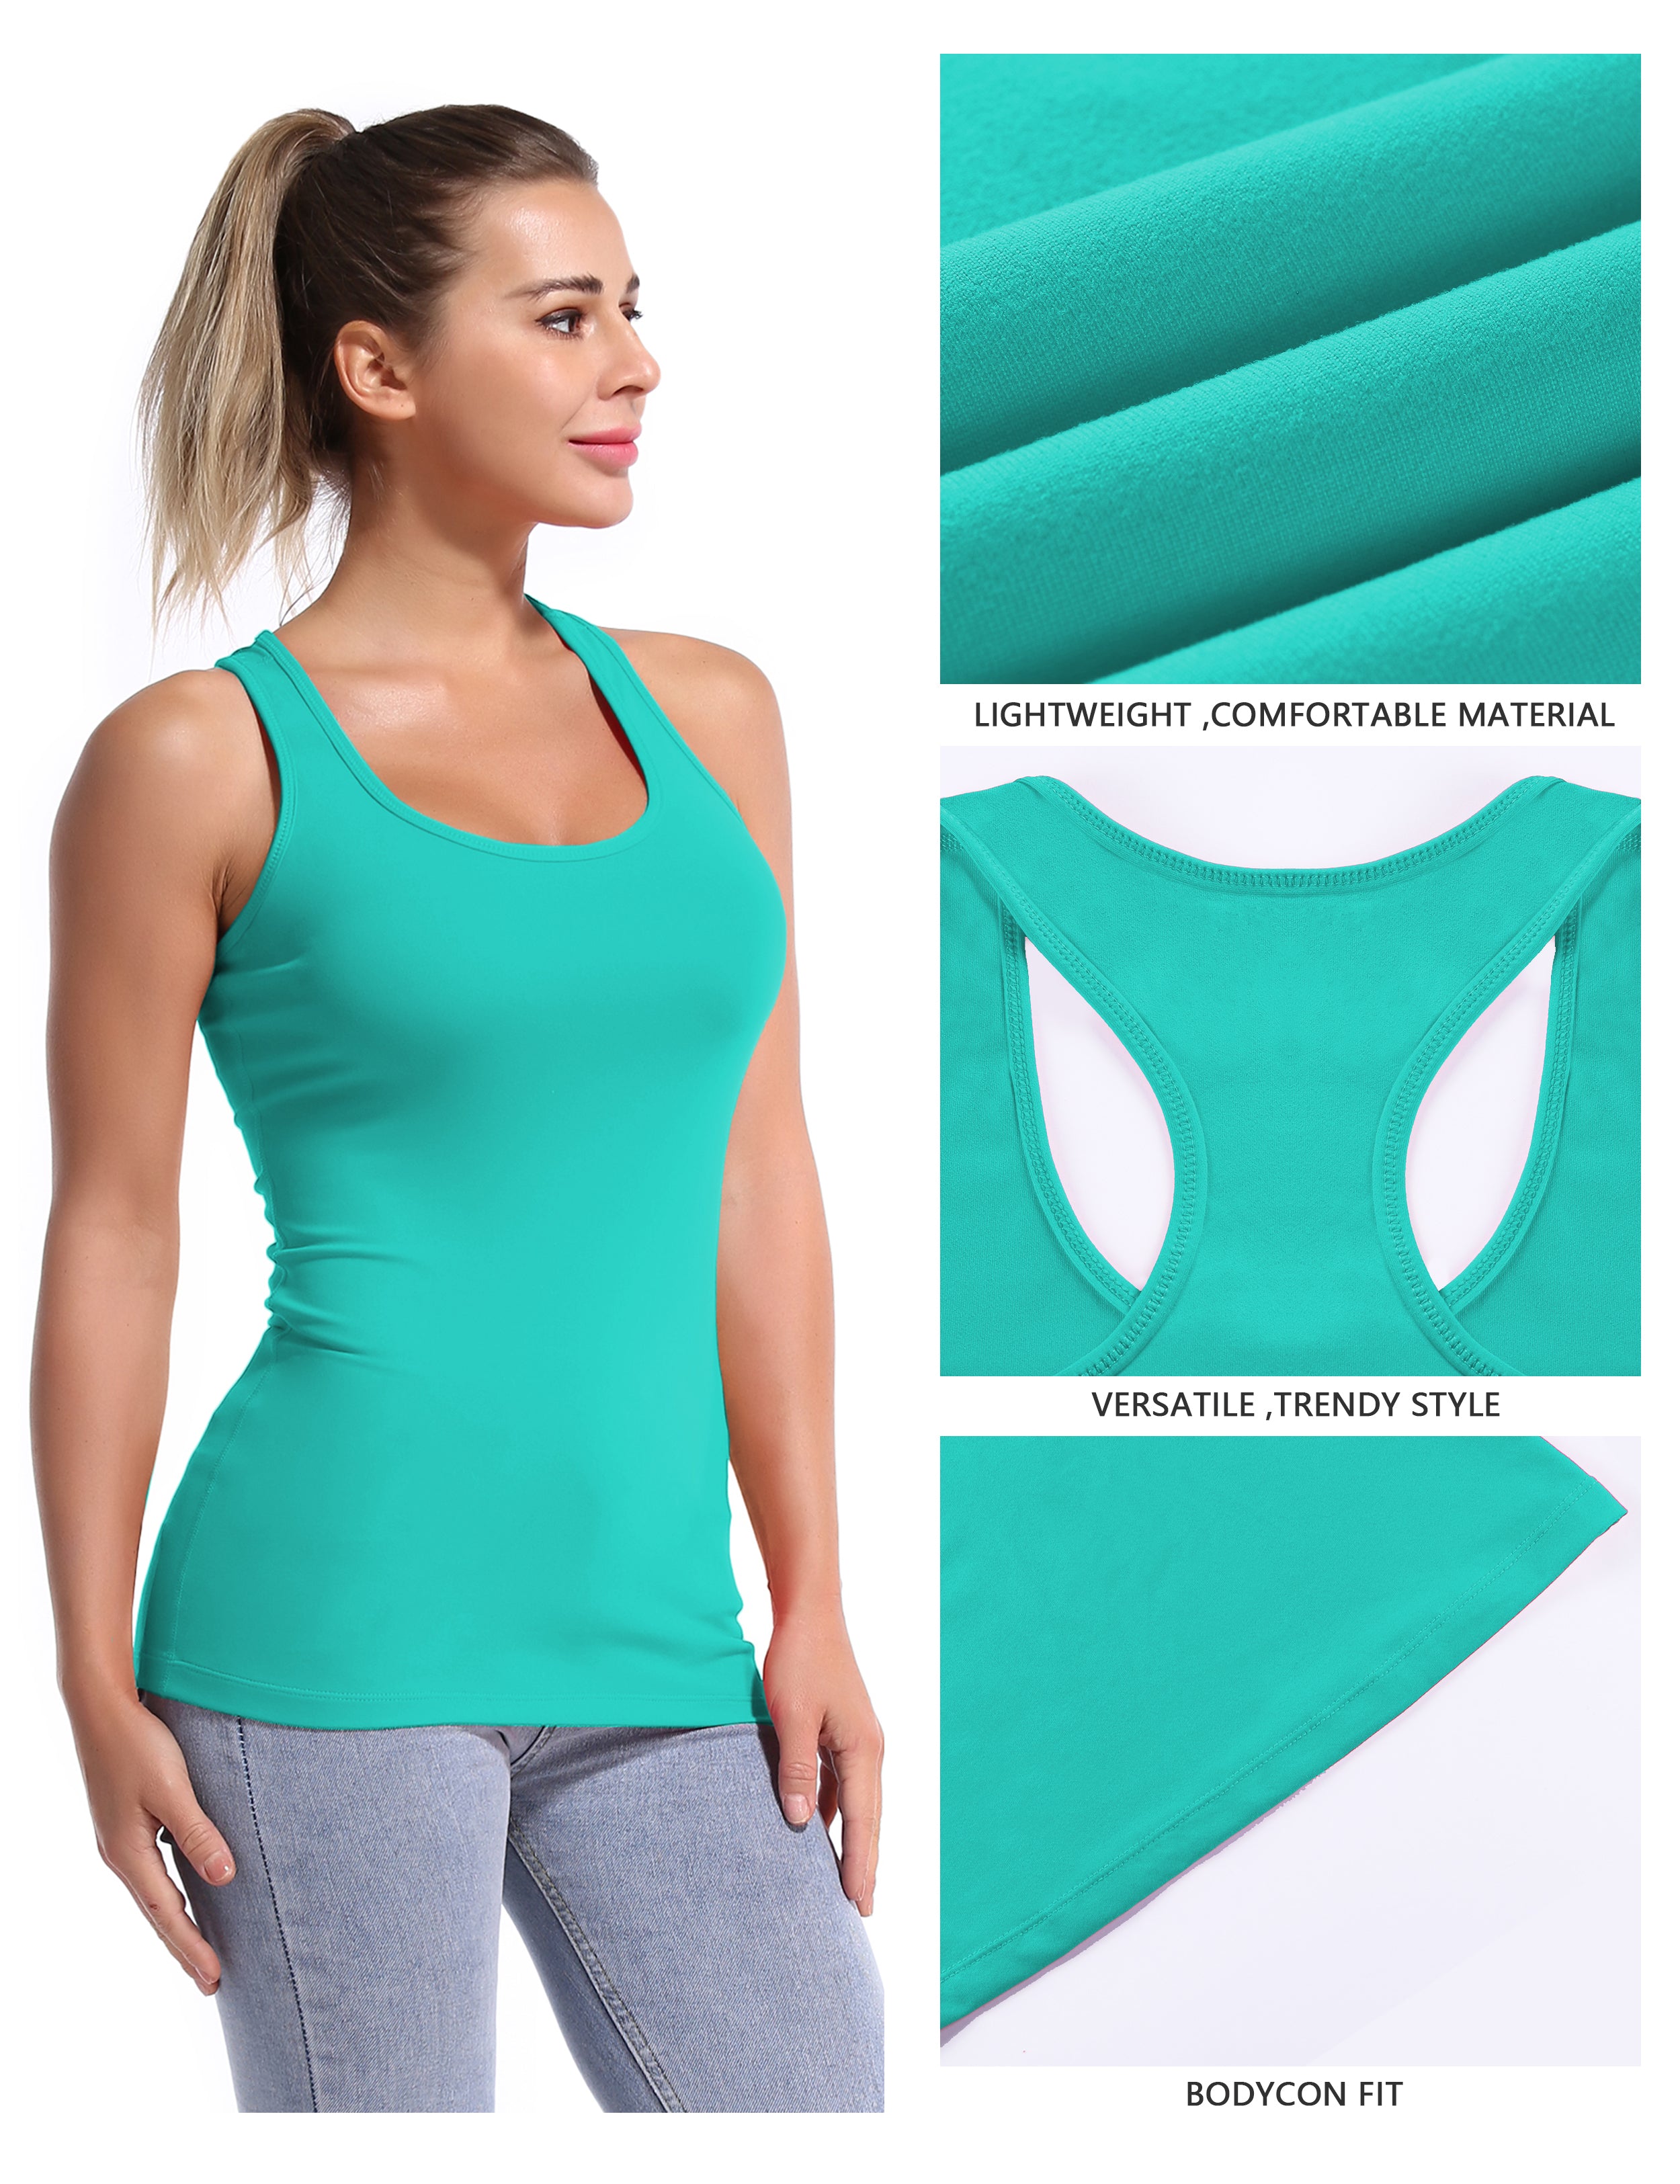 Racerback Athletic Tank Tops cyan 92%Nylon/8%Spandex(Cotton Soft) Designed for Jogging Tight Fit So buttery soft, it feels weightless Sweat-wicking Four-way stretch Breathable Contours your body Sits below the waistband for moderate, everyday coverage